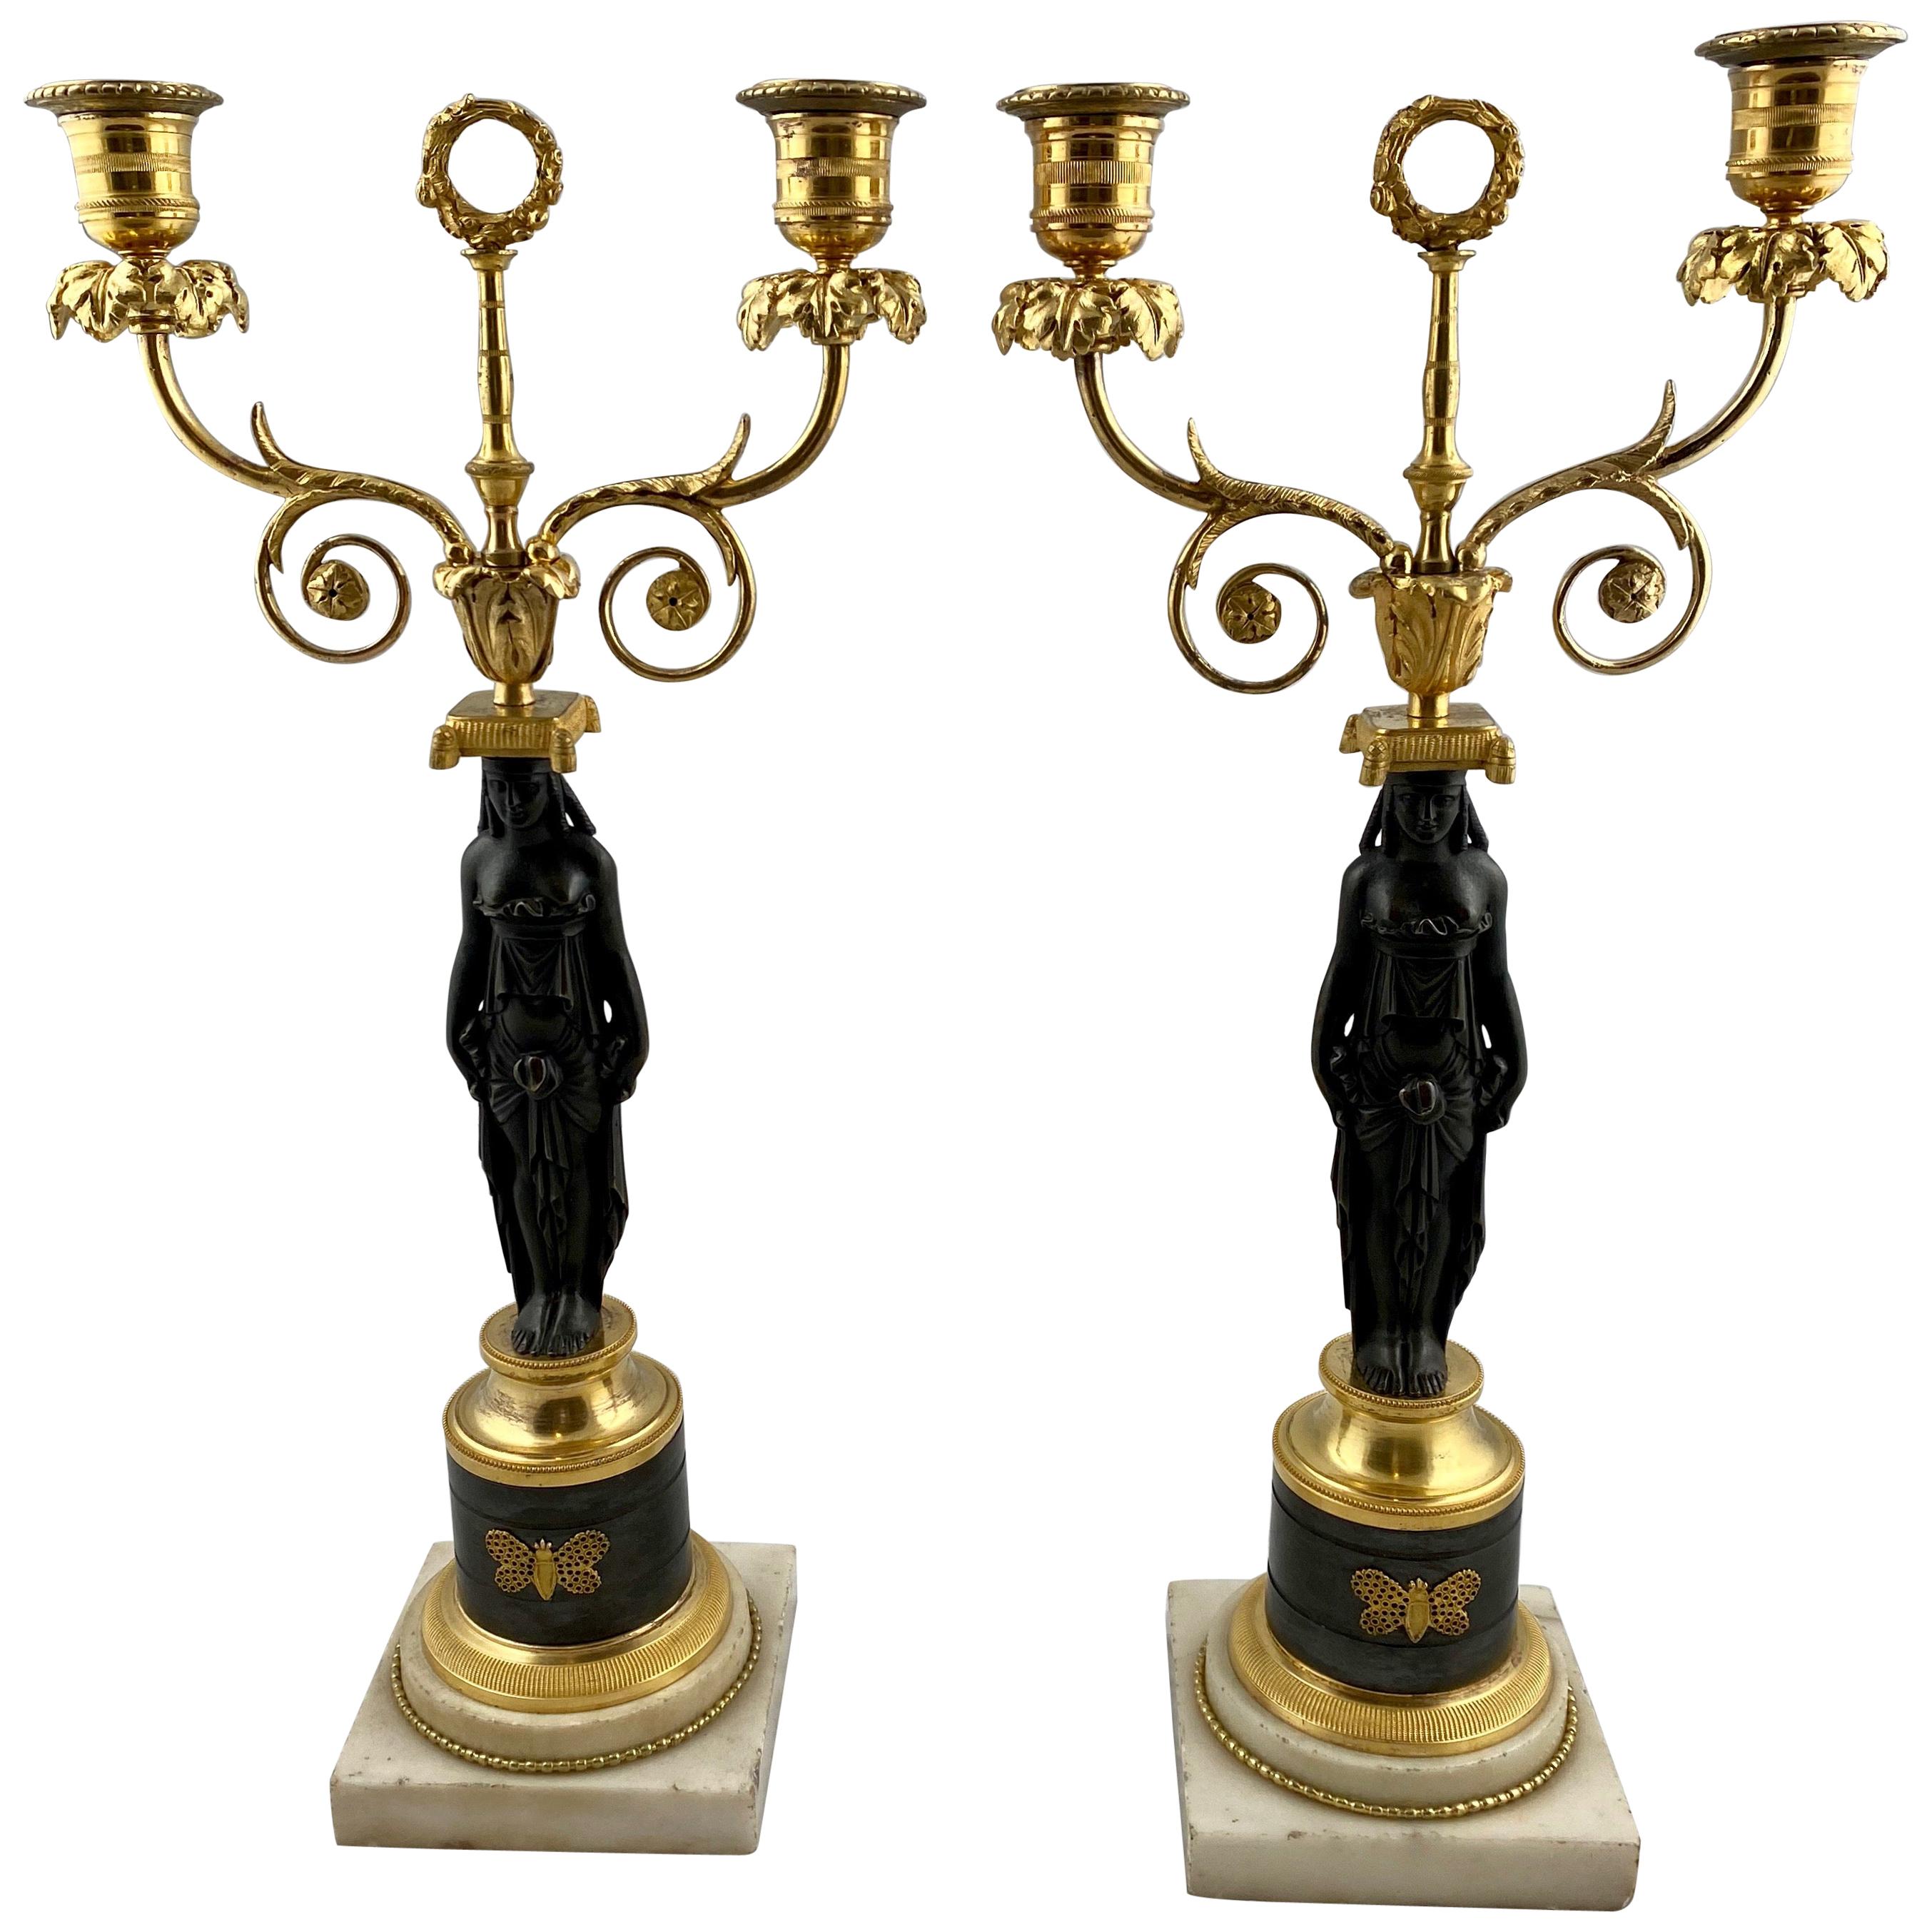 Pair of Late 18th Century Candelabras